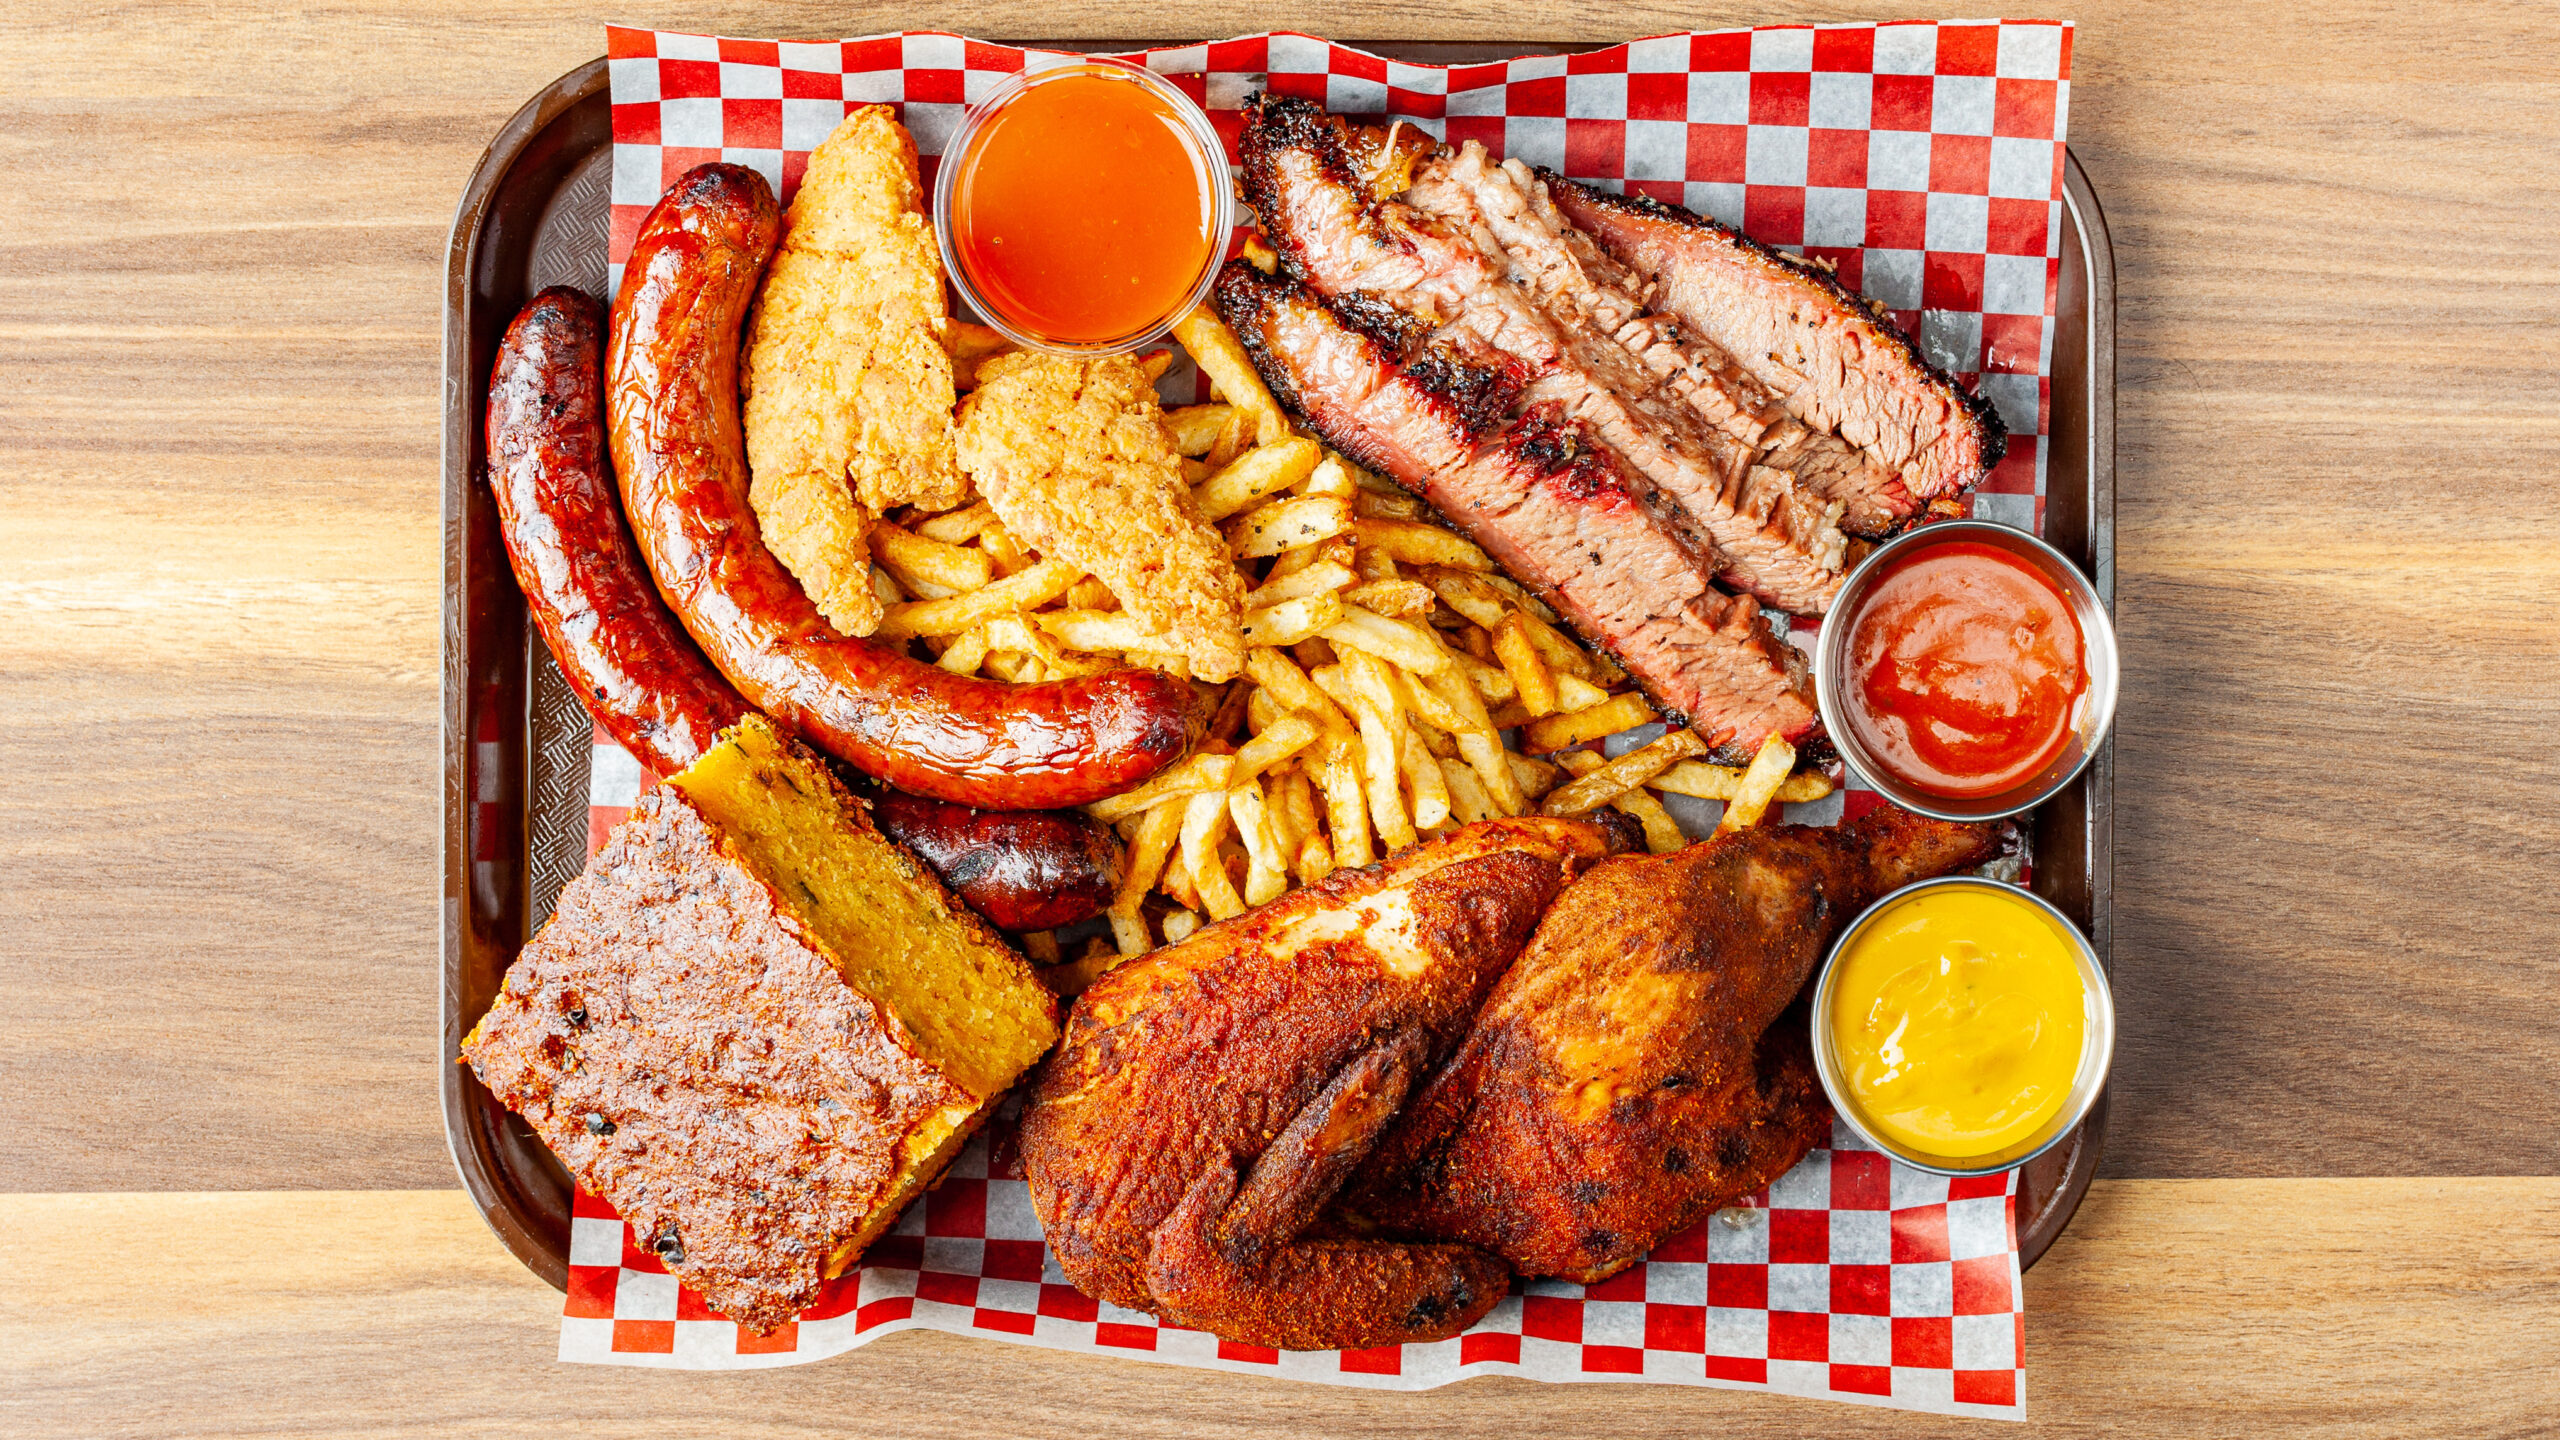 Prairie Dog Brewing's Coterie BBQ platter with chicken, brisket, chorizo sausage, chicken tenders and two sides and sauces.